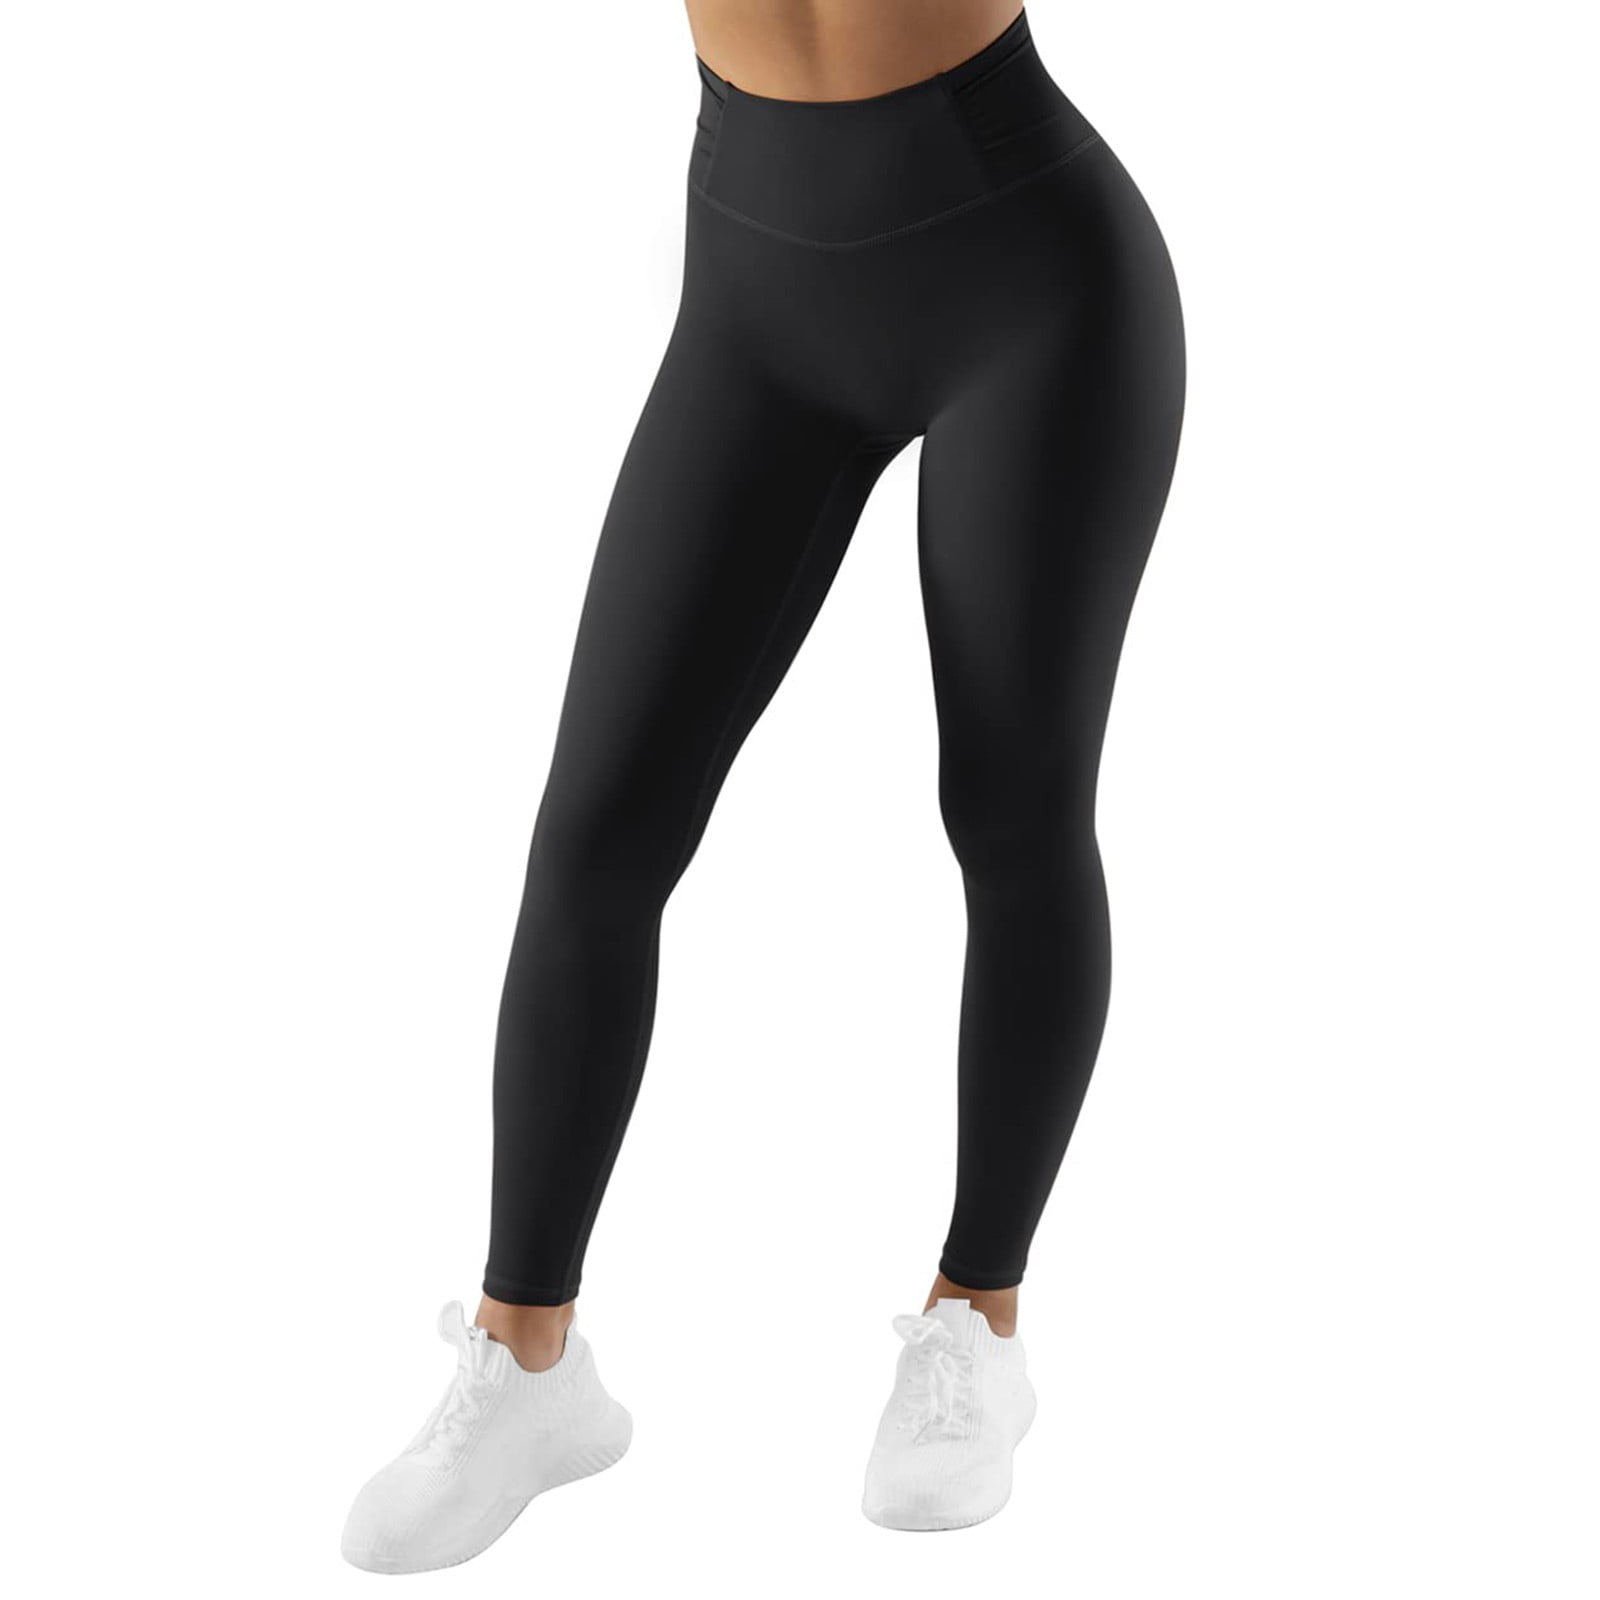 High Waisted Leggings for Women No Front Seam Ruched Workout Pants